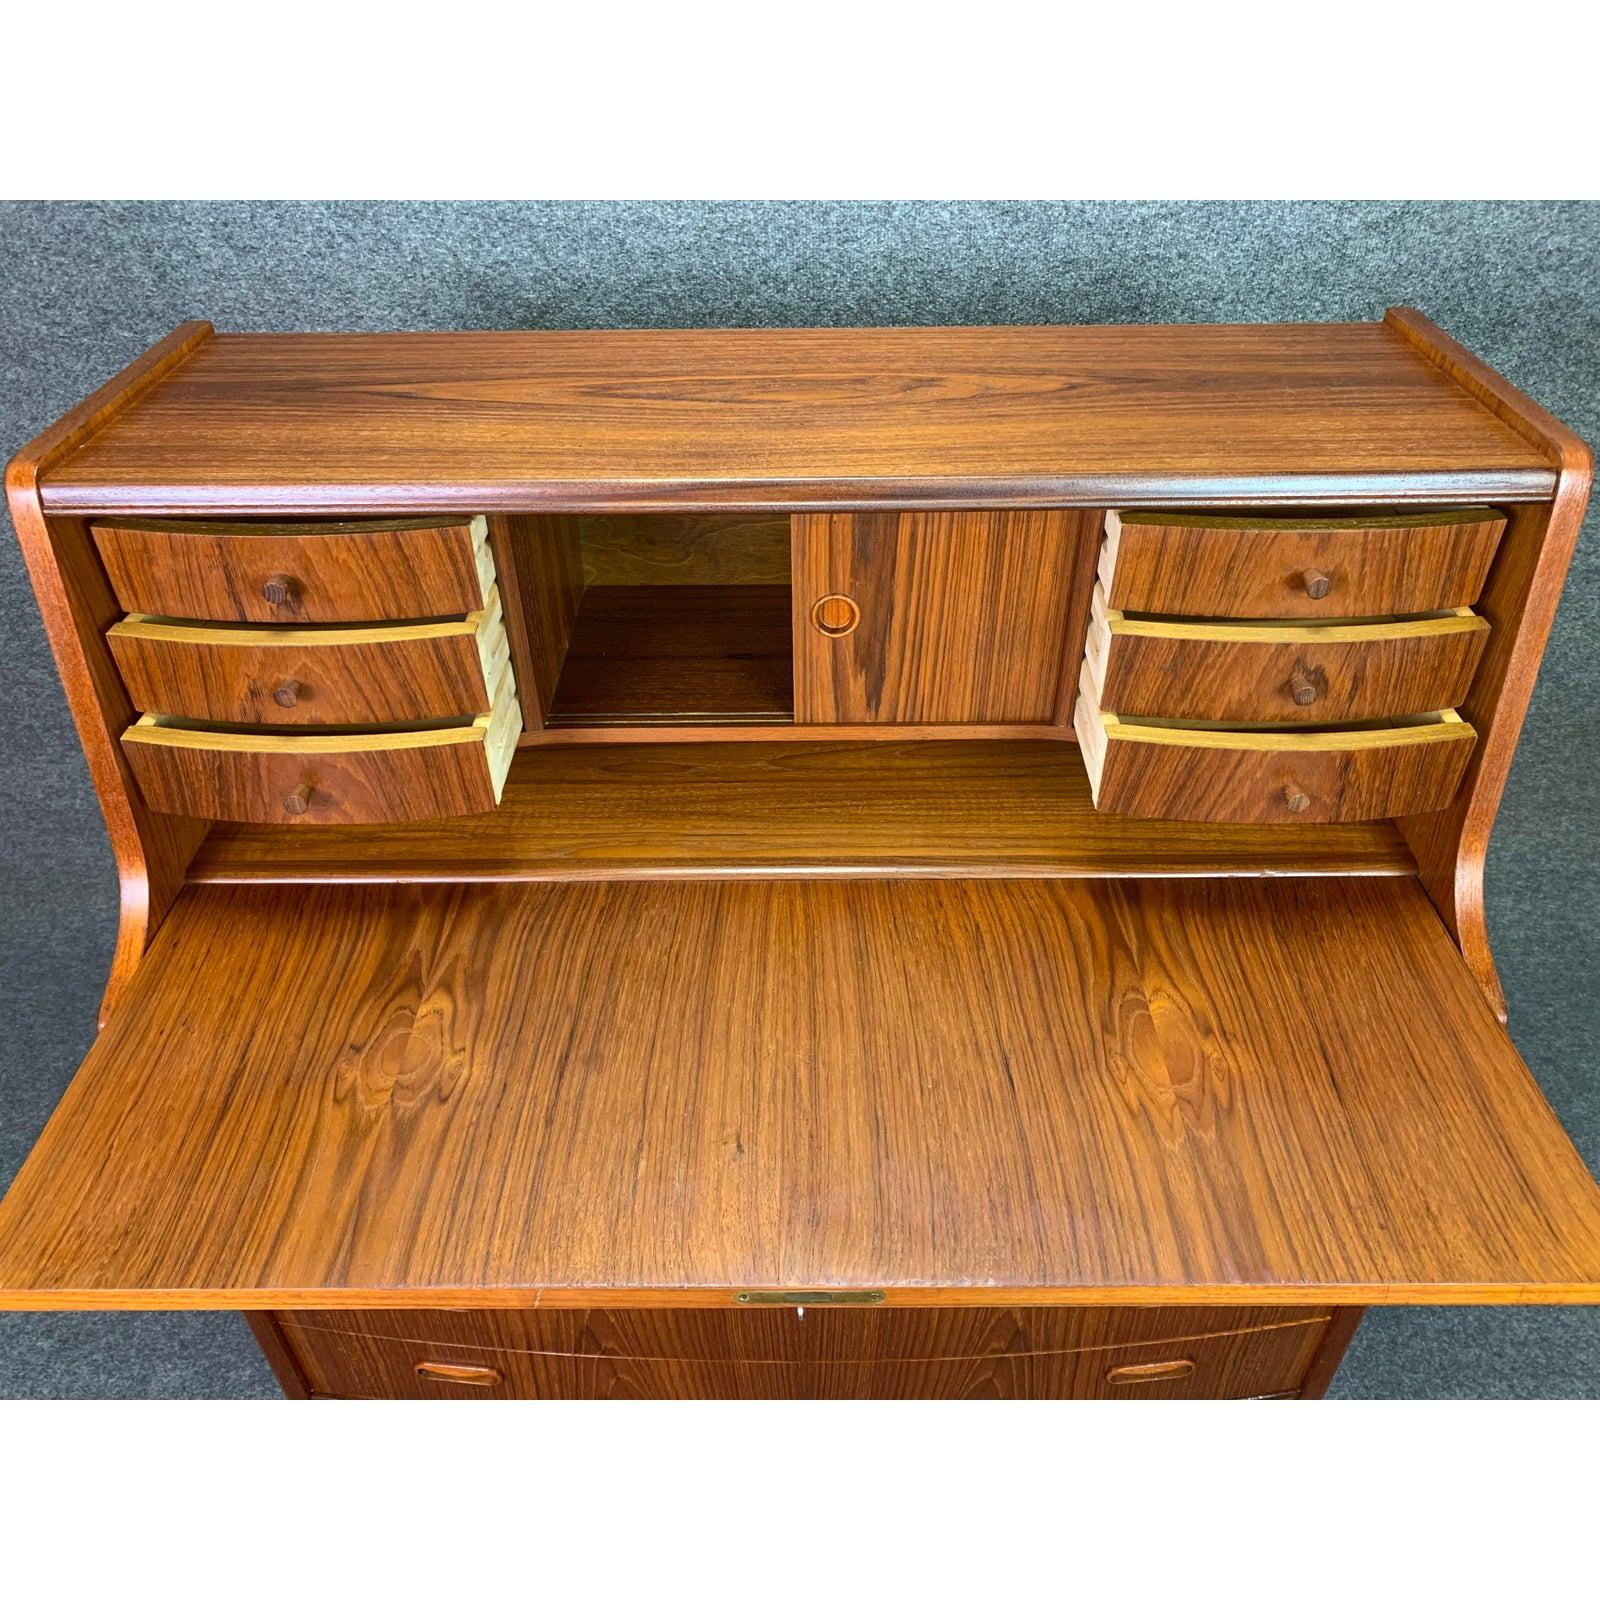 Here is a beautiful Scandinavian Modern secretary desk - dresser in teak wood manufactured in Denmark by PMJ Mobelfabrik in the 1960s.
This lovely piece, recently imported from Copenhagen to California before its restoration, features a vibrant